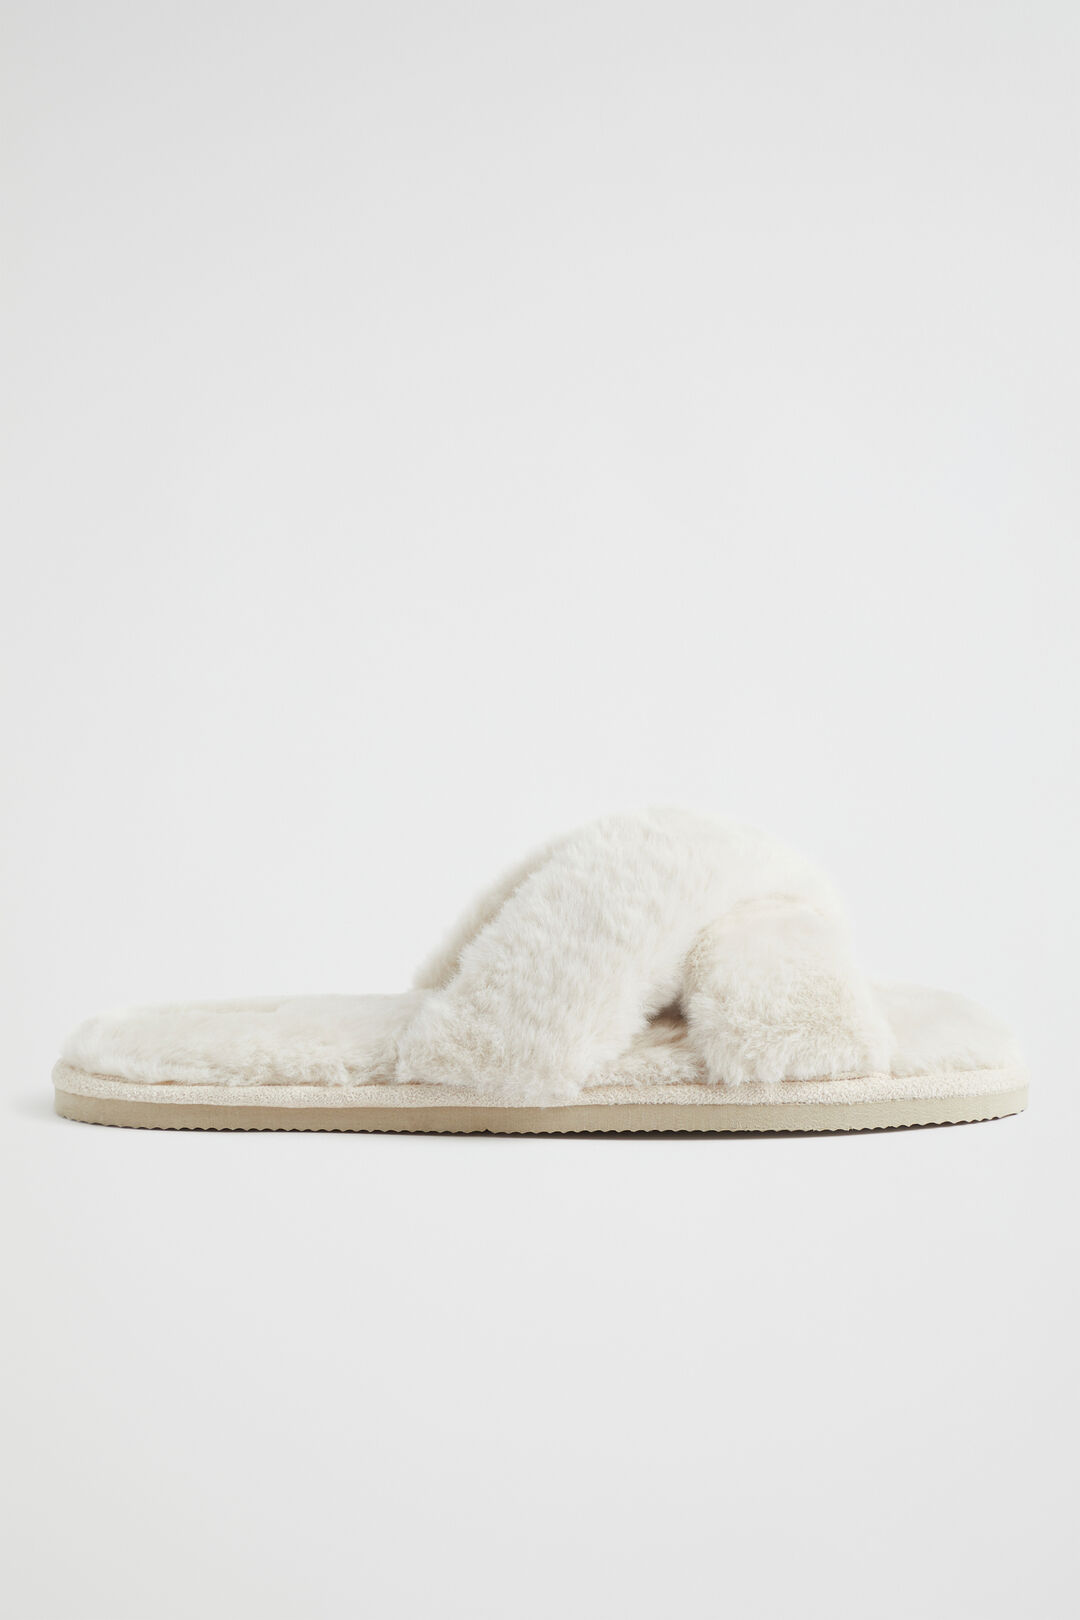 Crossover Slippers  Flax  hi-res